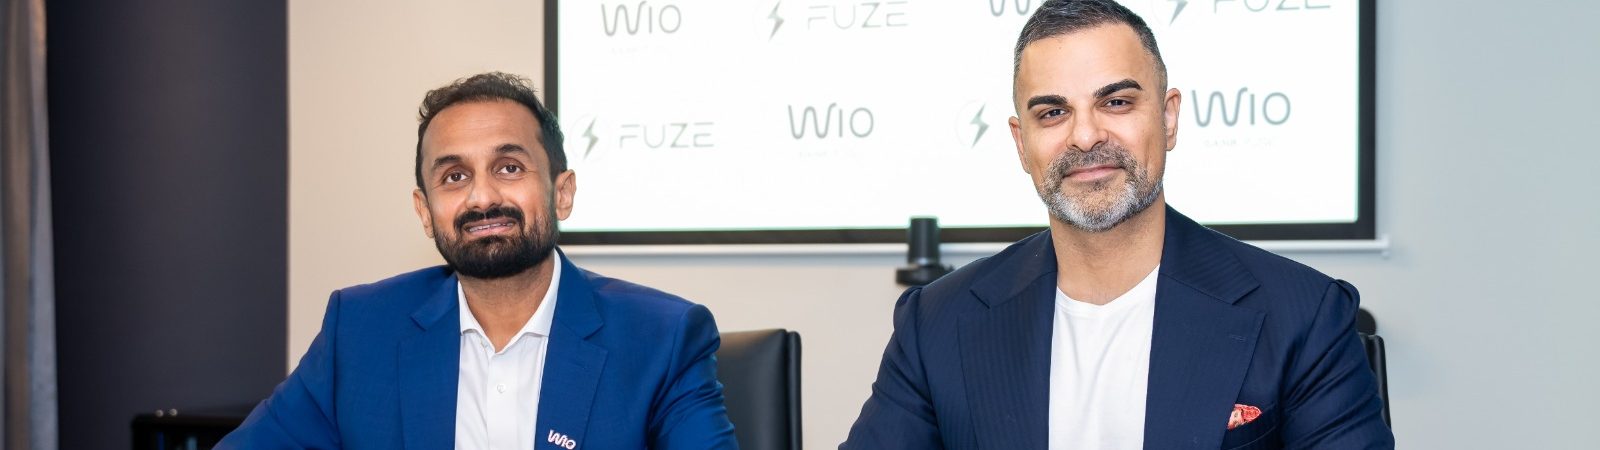 Wio bank customers can trade crypto, Bitcoin, and Ethereum using UAE Fuze digital assets infrastructure